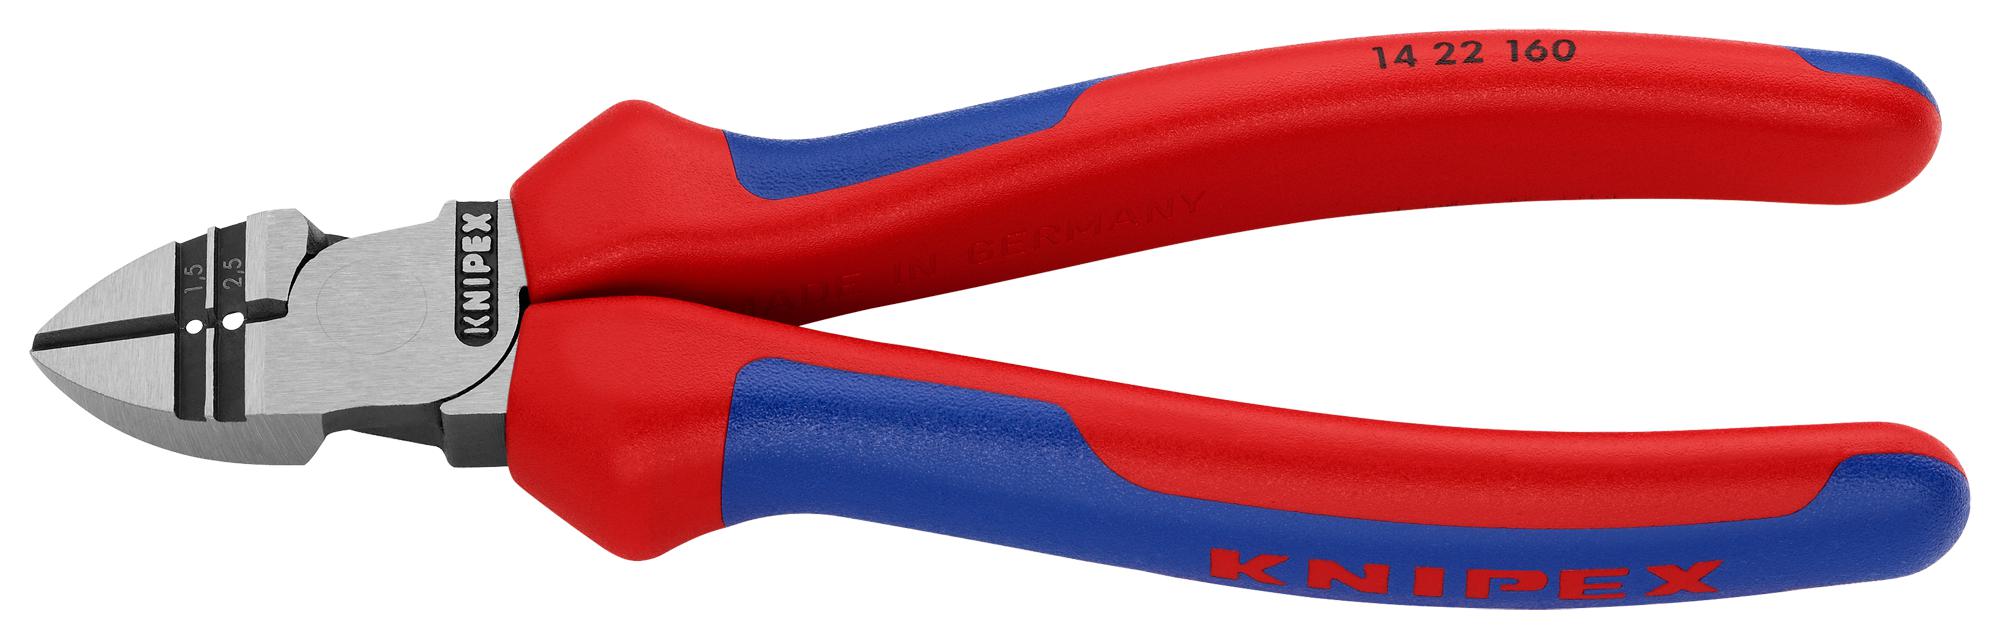 14 22 160 CUTTER, SIDE KNIPEX